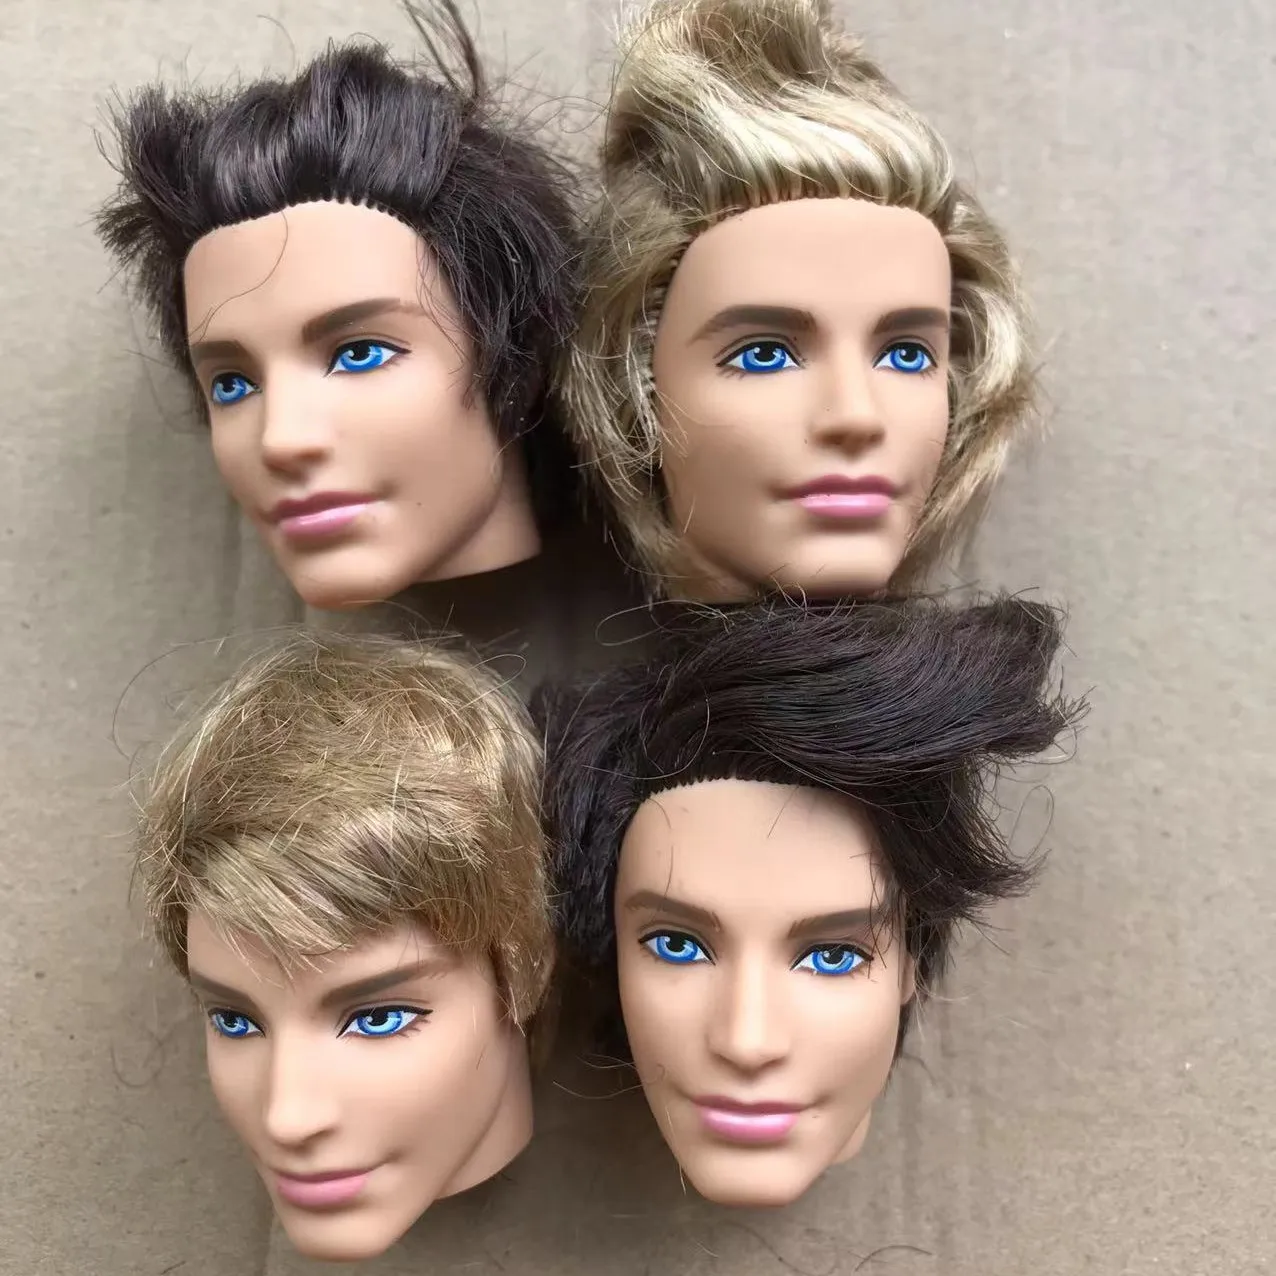 Prince Ken Doll Head Toy Asia Face Men Doll Head DIY Doll Toy Parts Kids Christmas Gift White Brown Black Skin Men Doll Heads